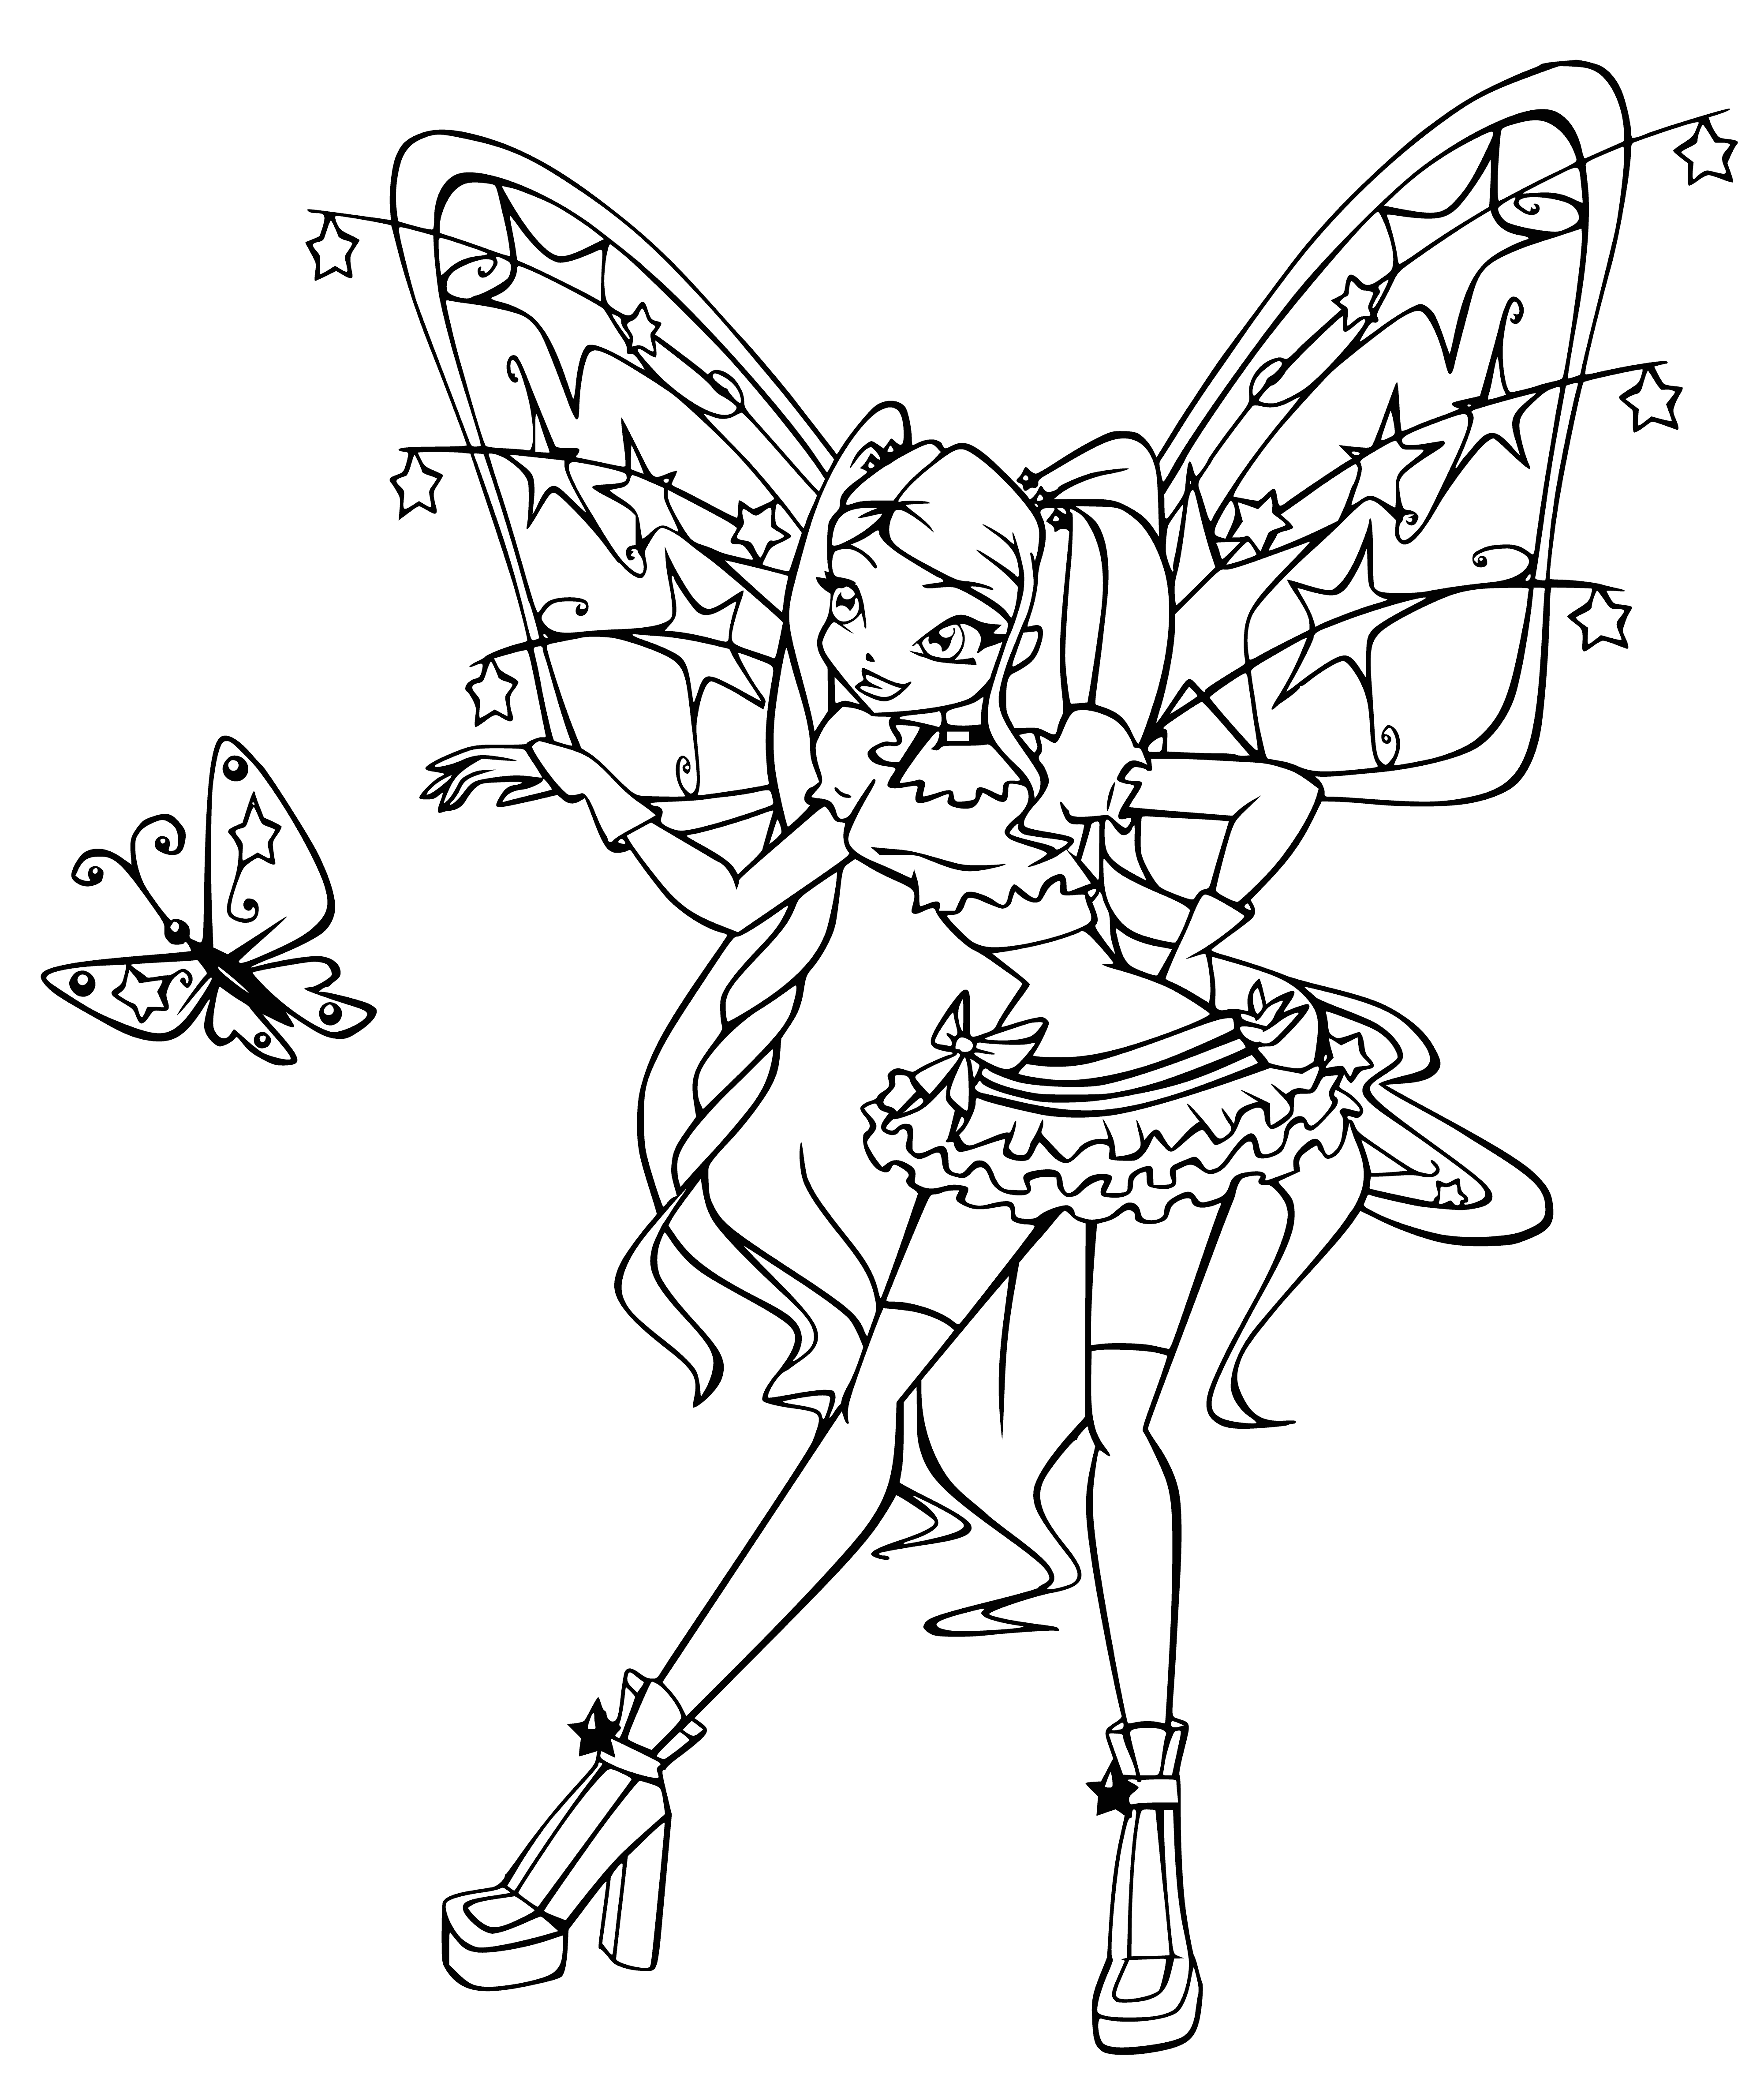 coloring page: Stella is a pink-haired fairy with butterfly-like wings, in a magenta dress & purple high-heeled shoes, wearing a silver necklace & tiara with a pink gem.